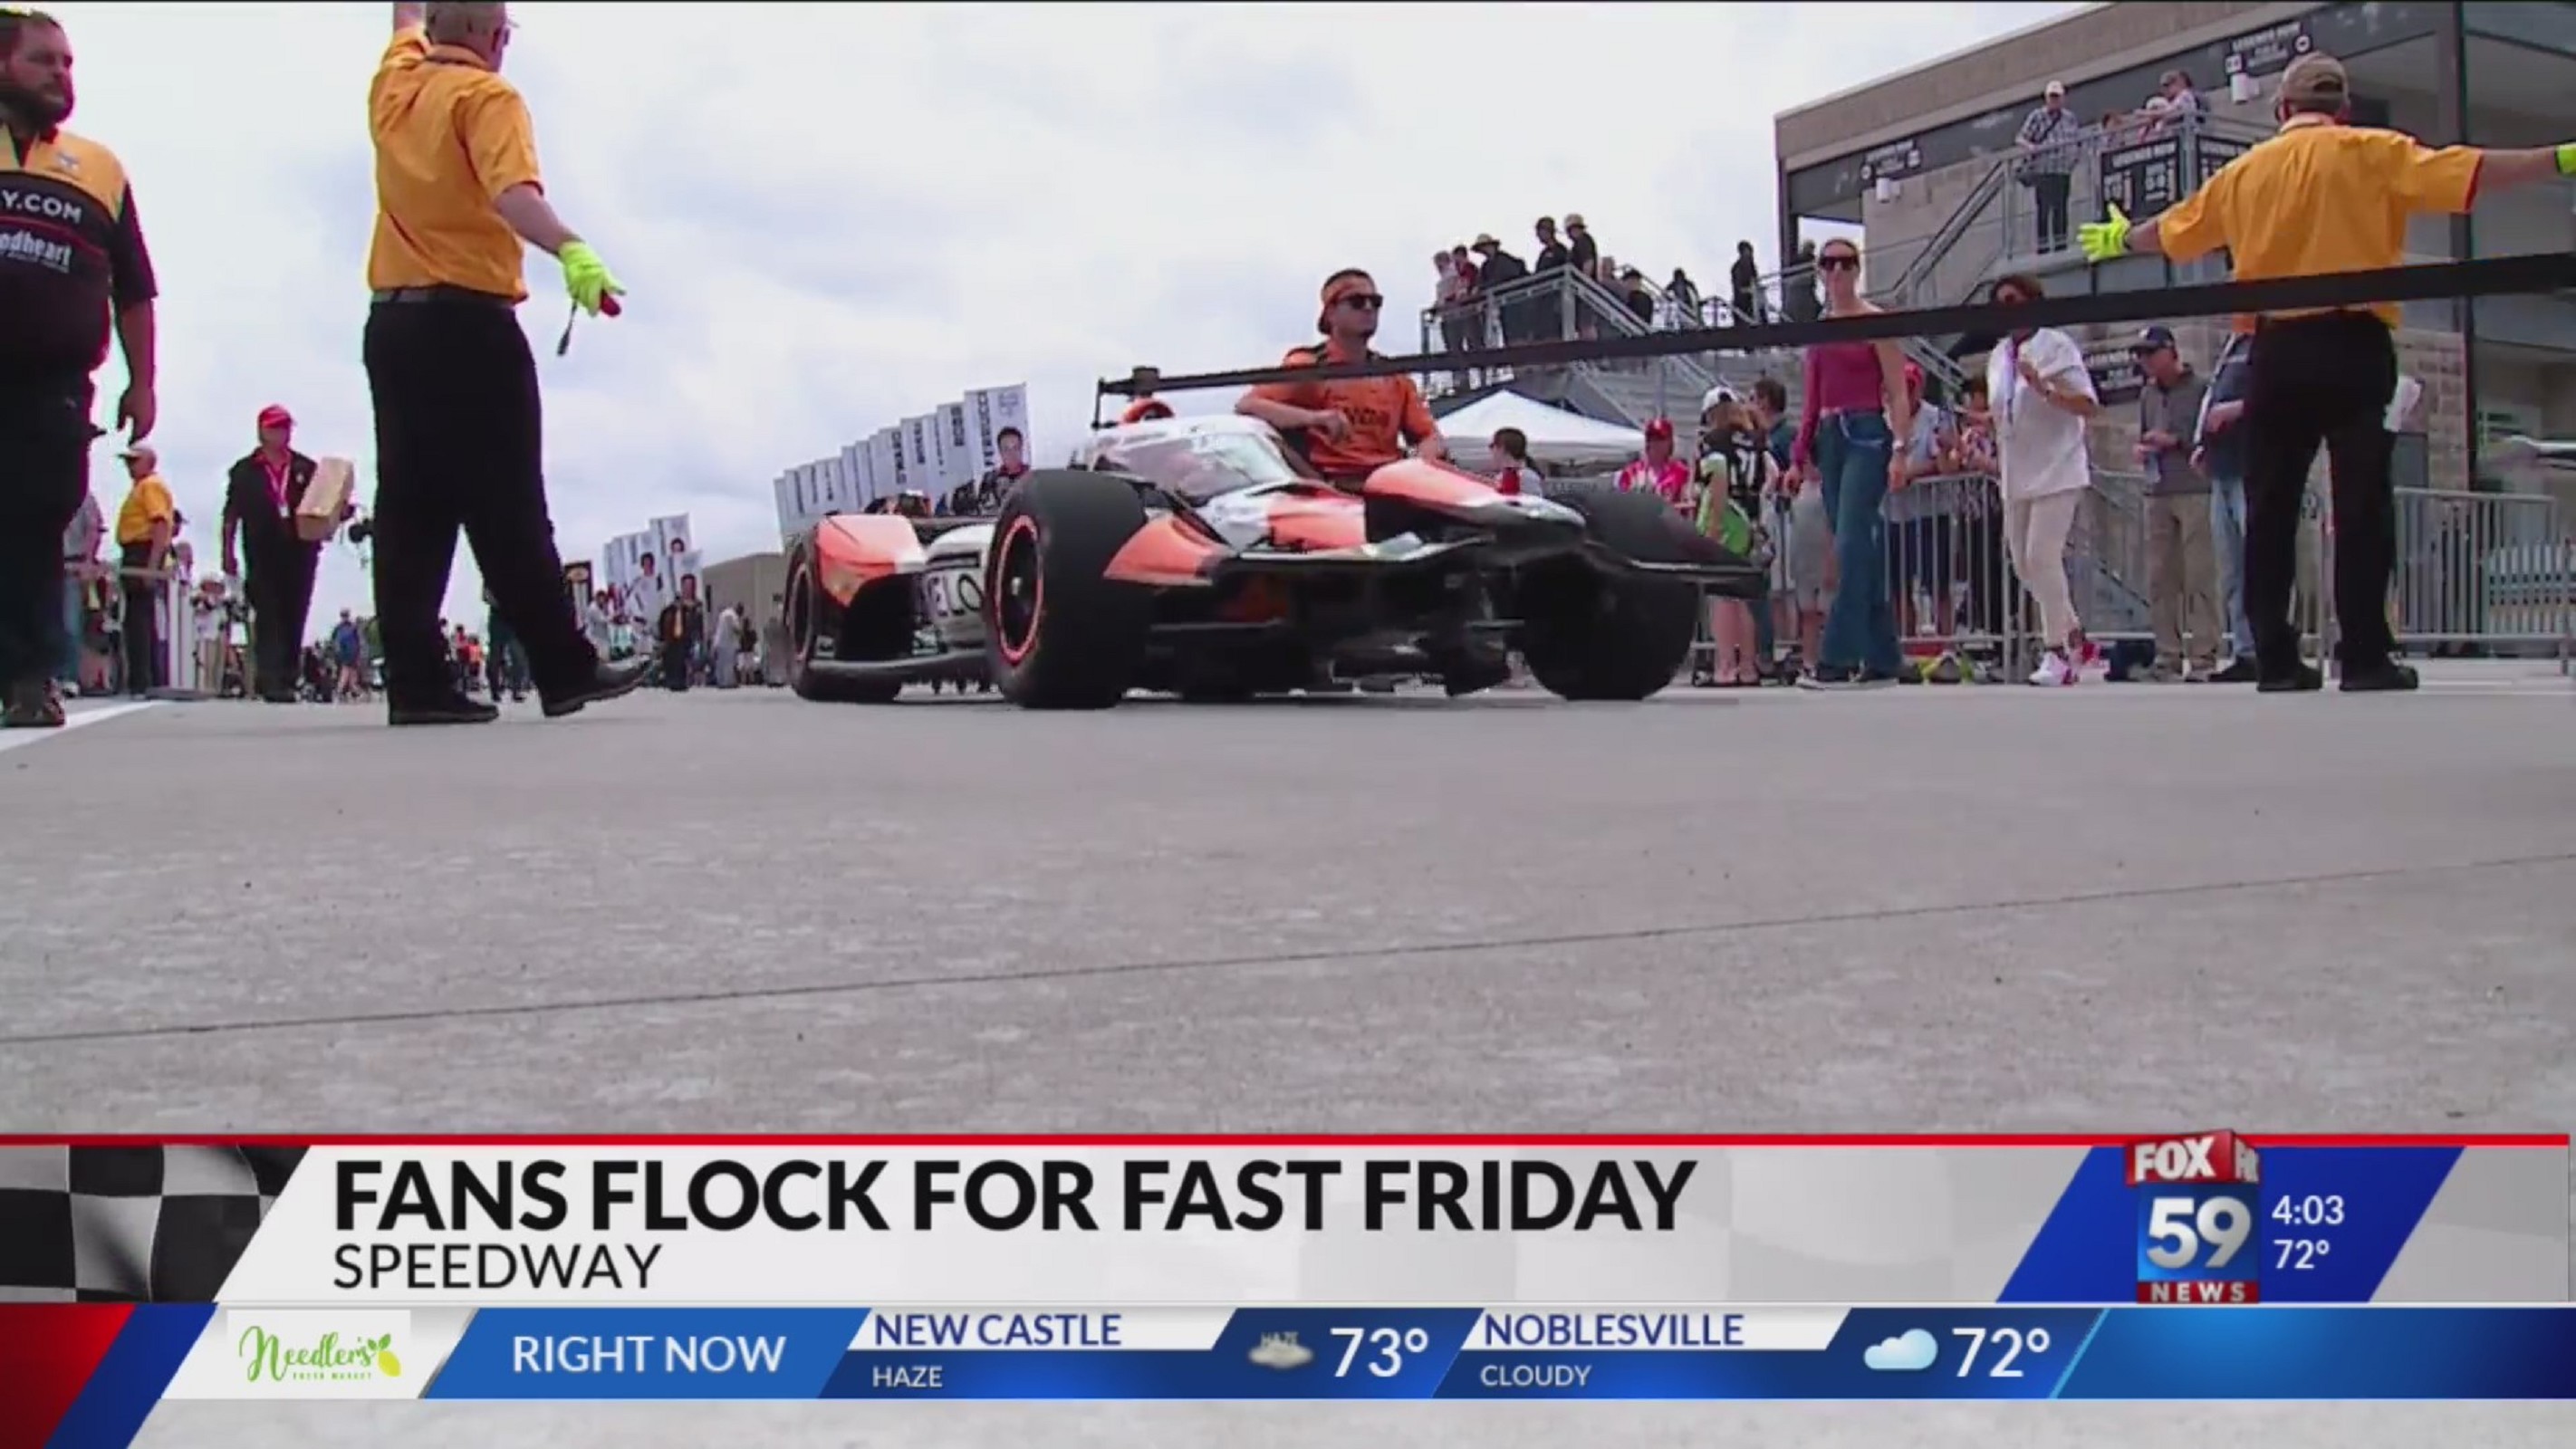 Fans flock to Indianapolis Motor Speedway for Fast Friday